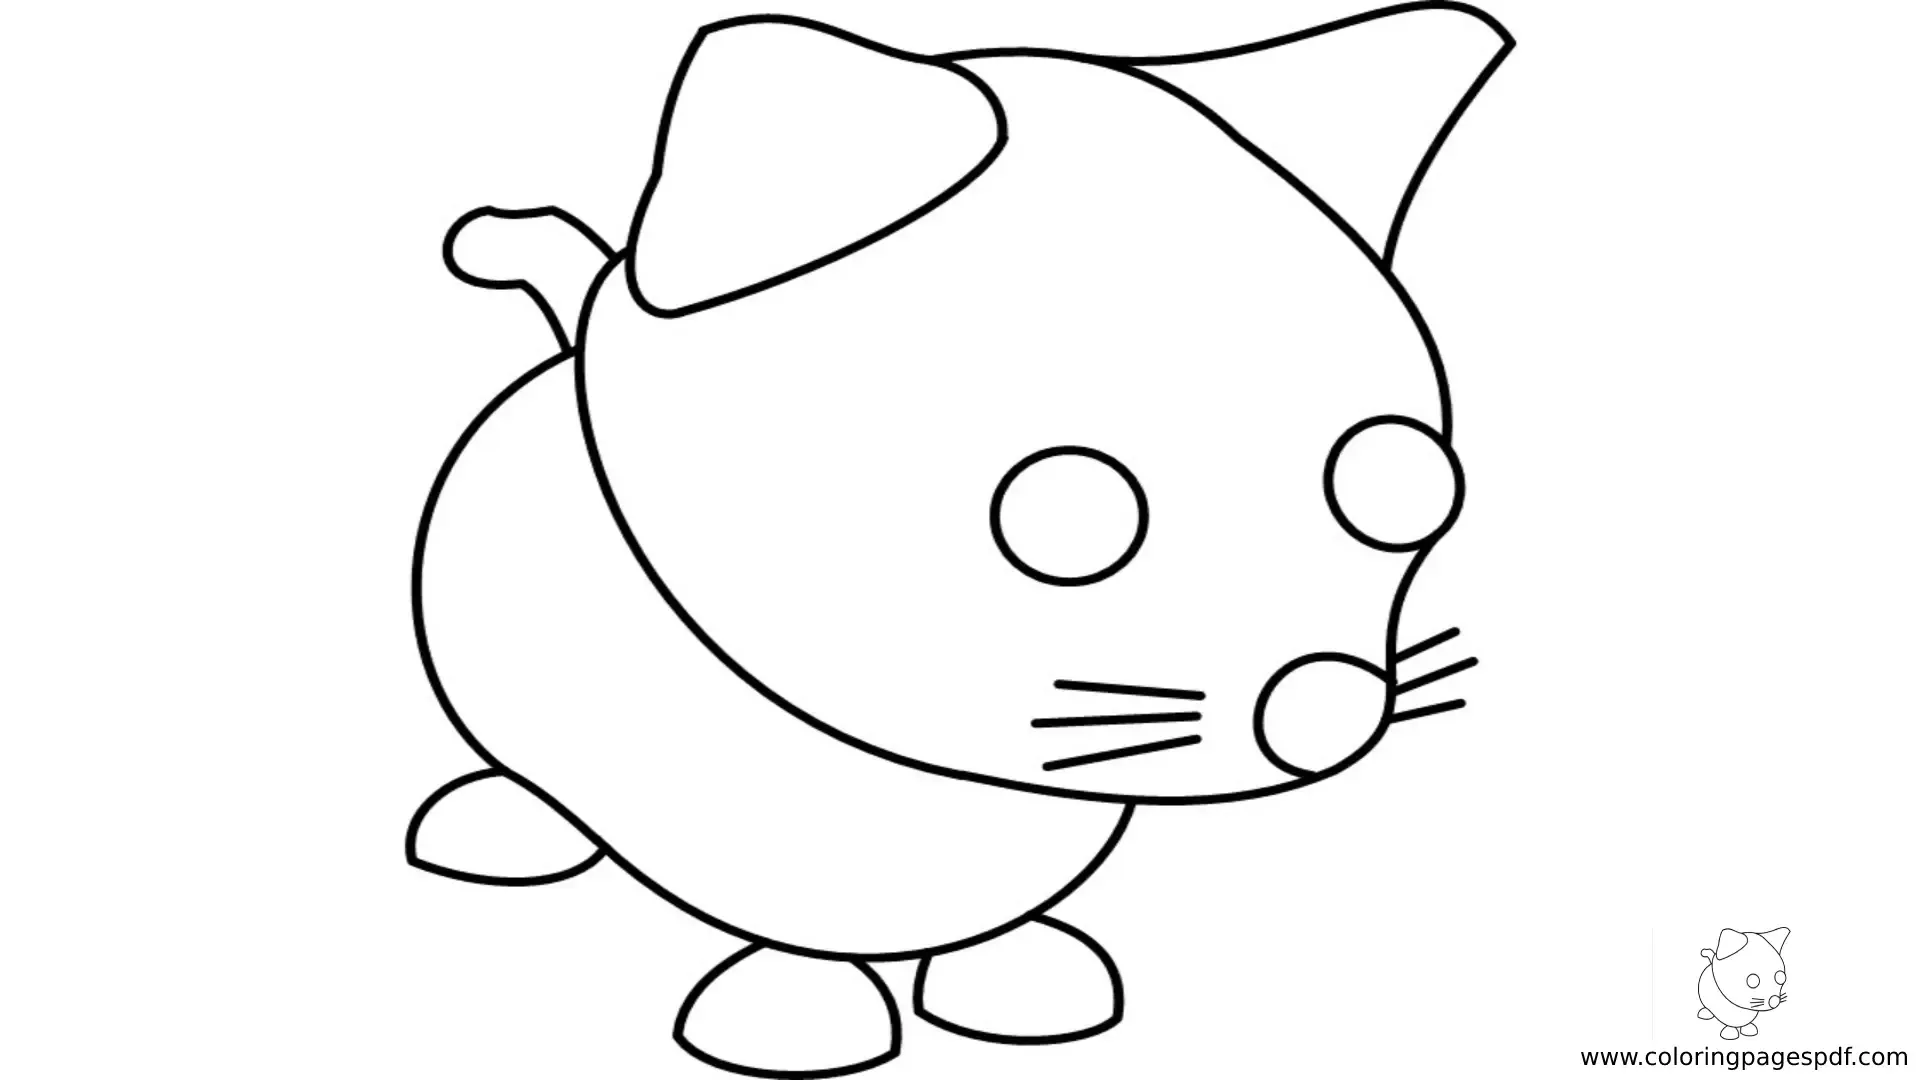 Adopt Me Coloring Pages